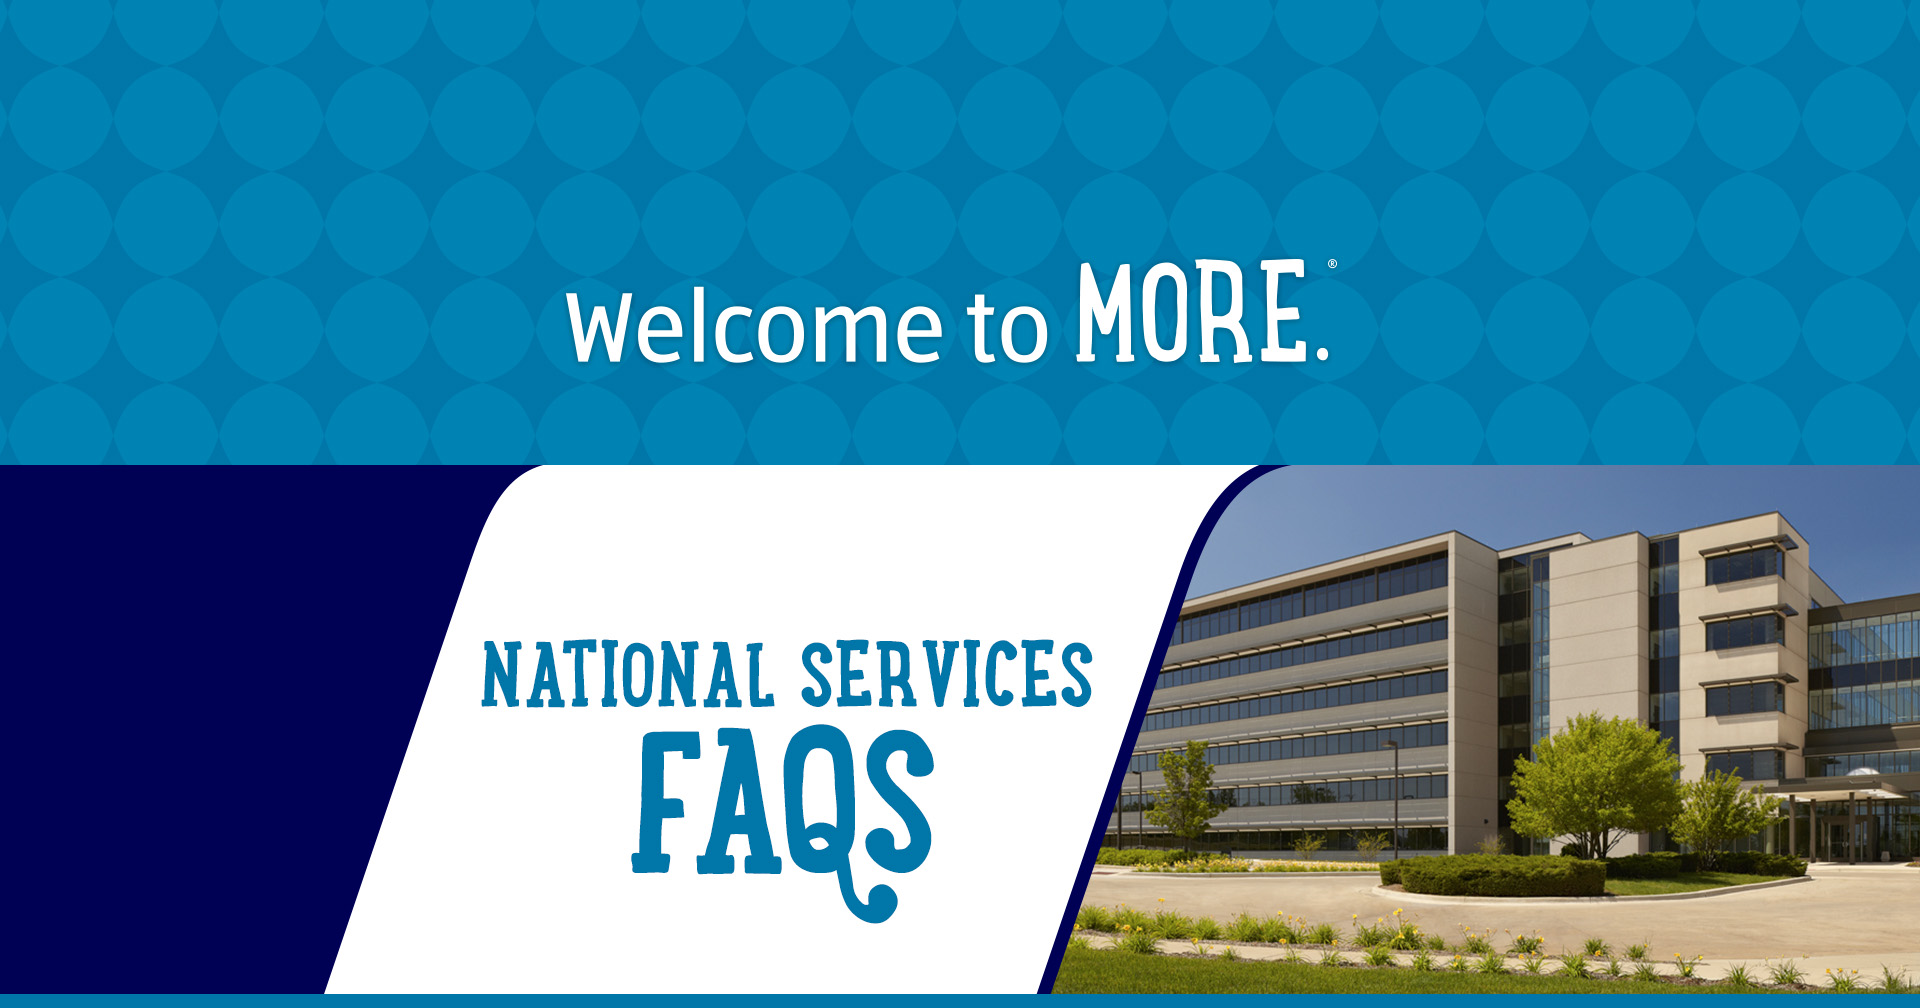 National Services FAQs